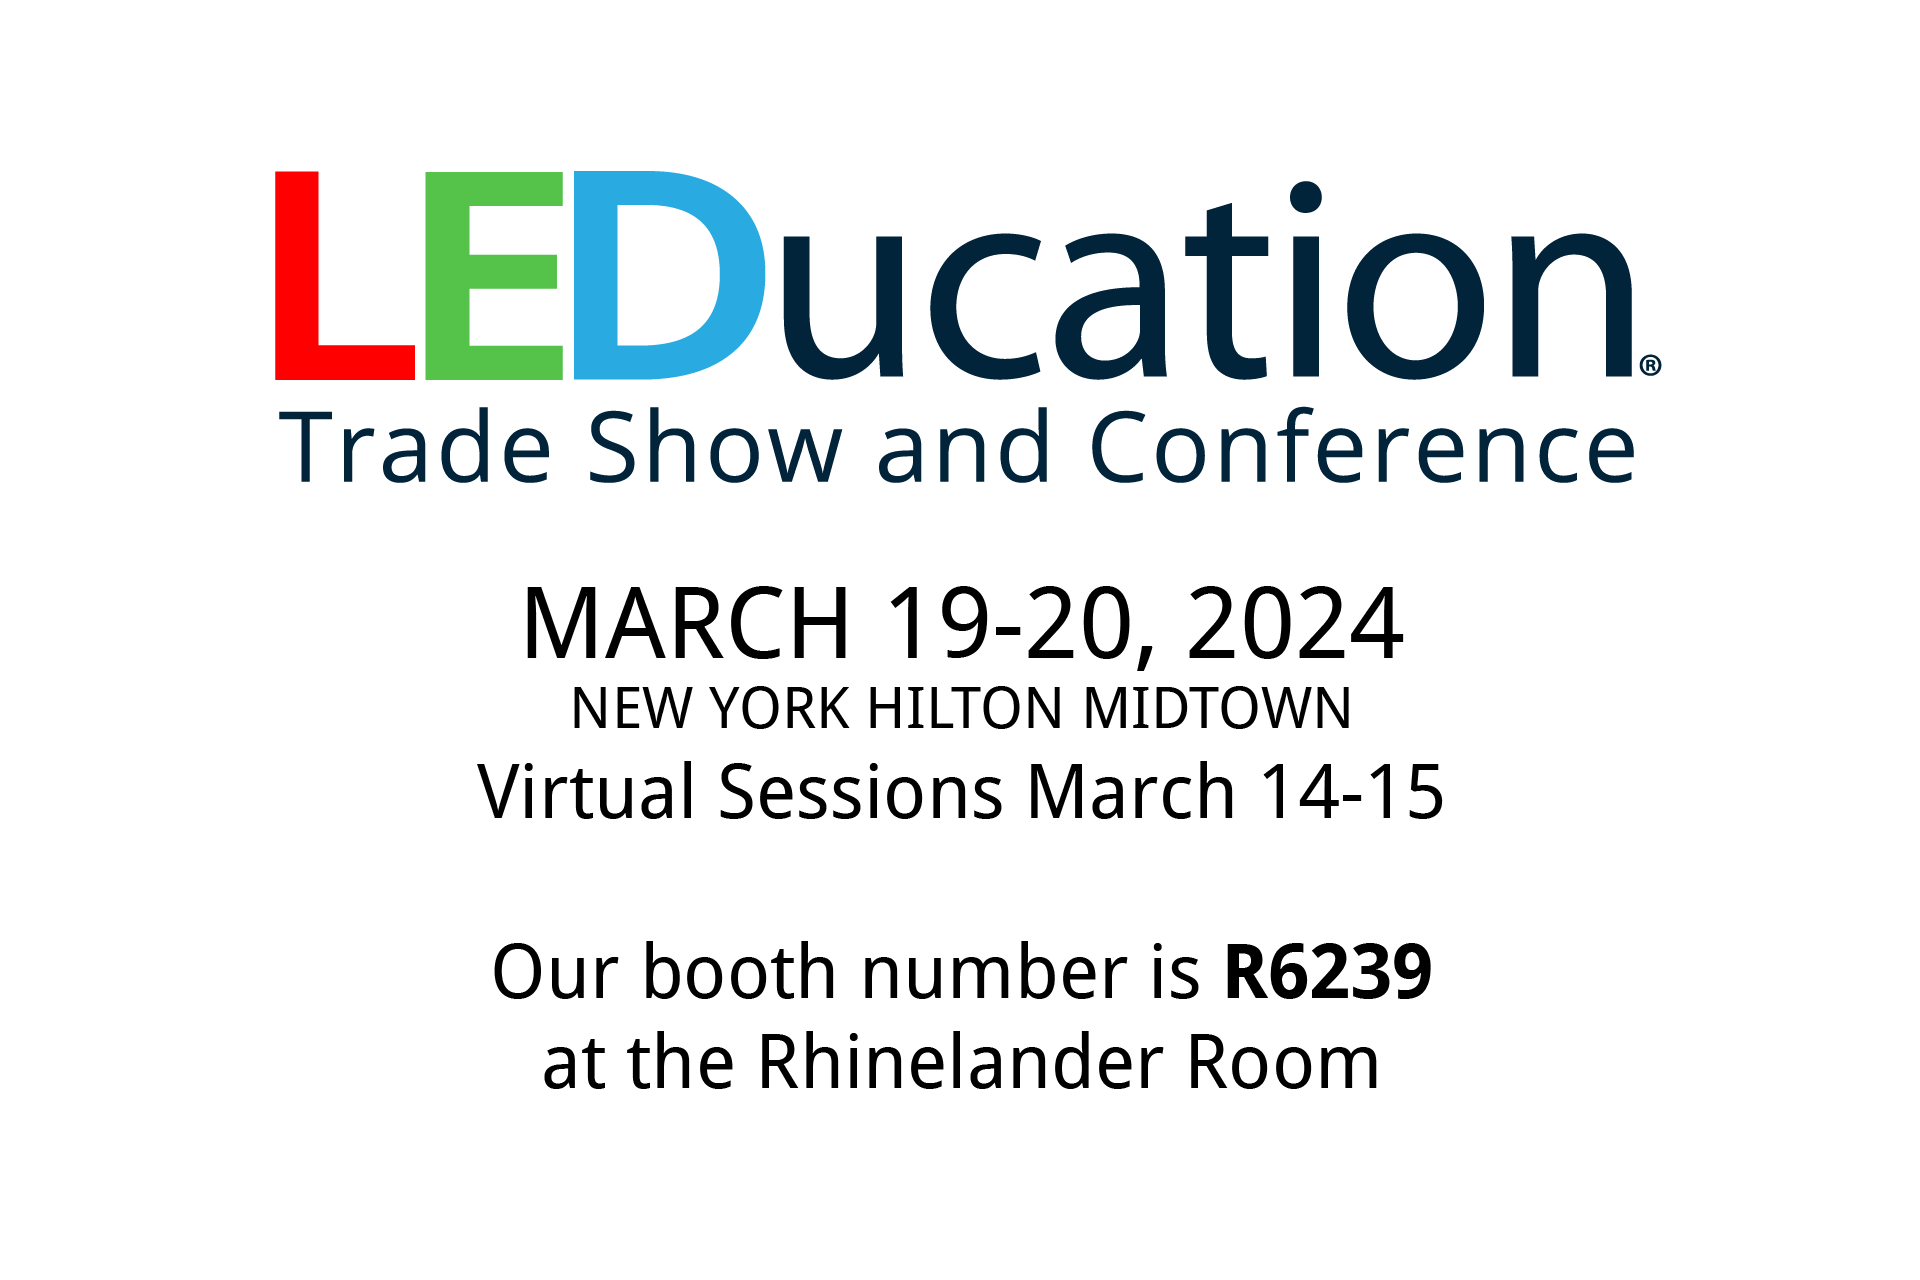 LEDucation Show in NYC